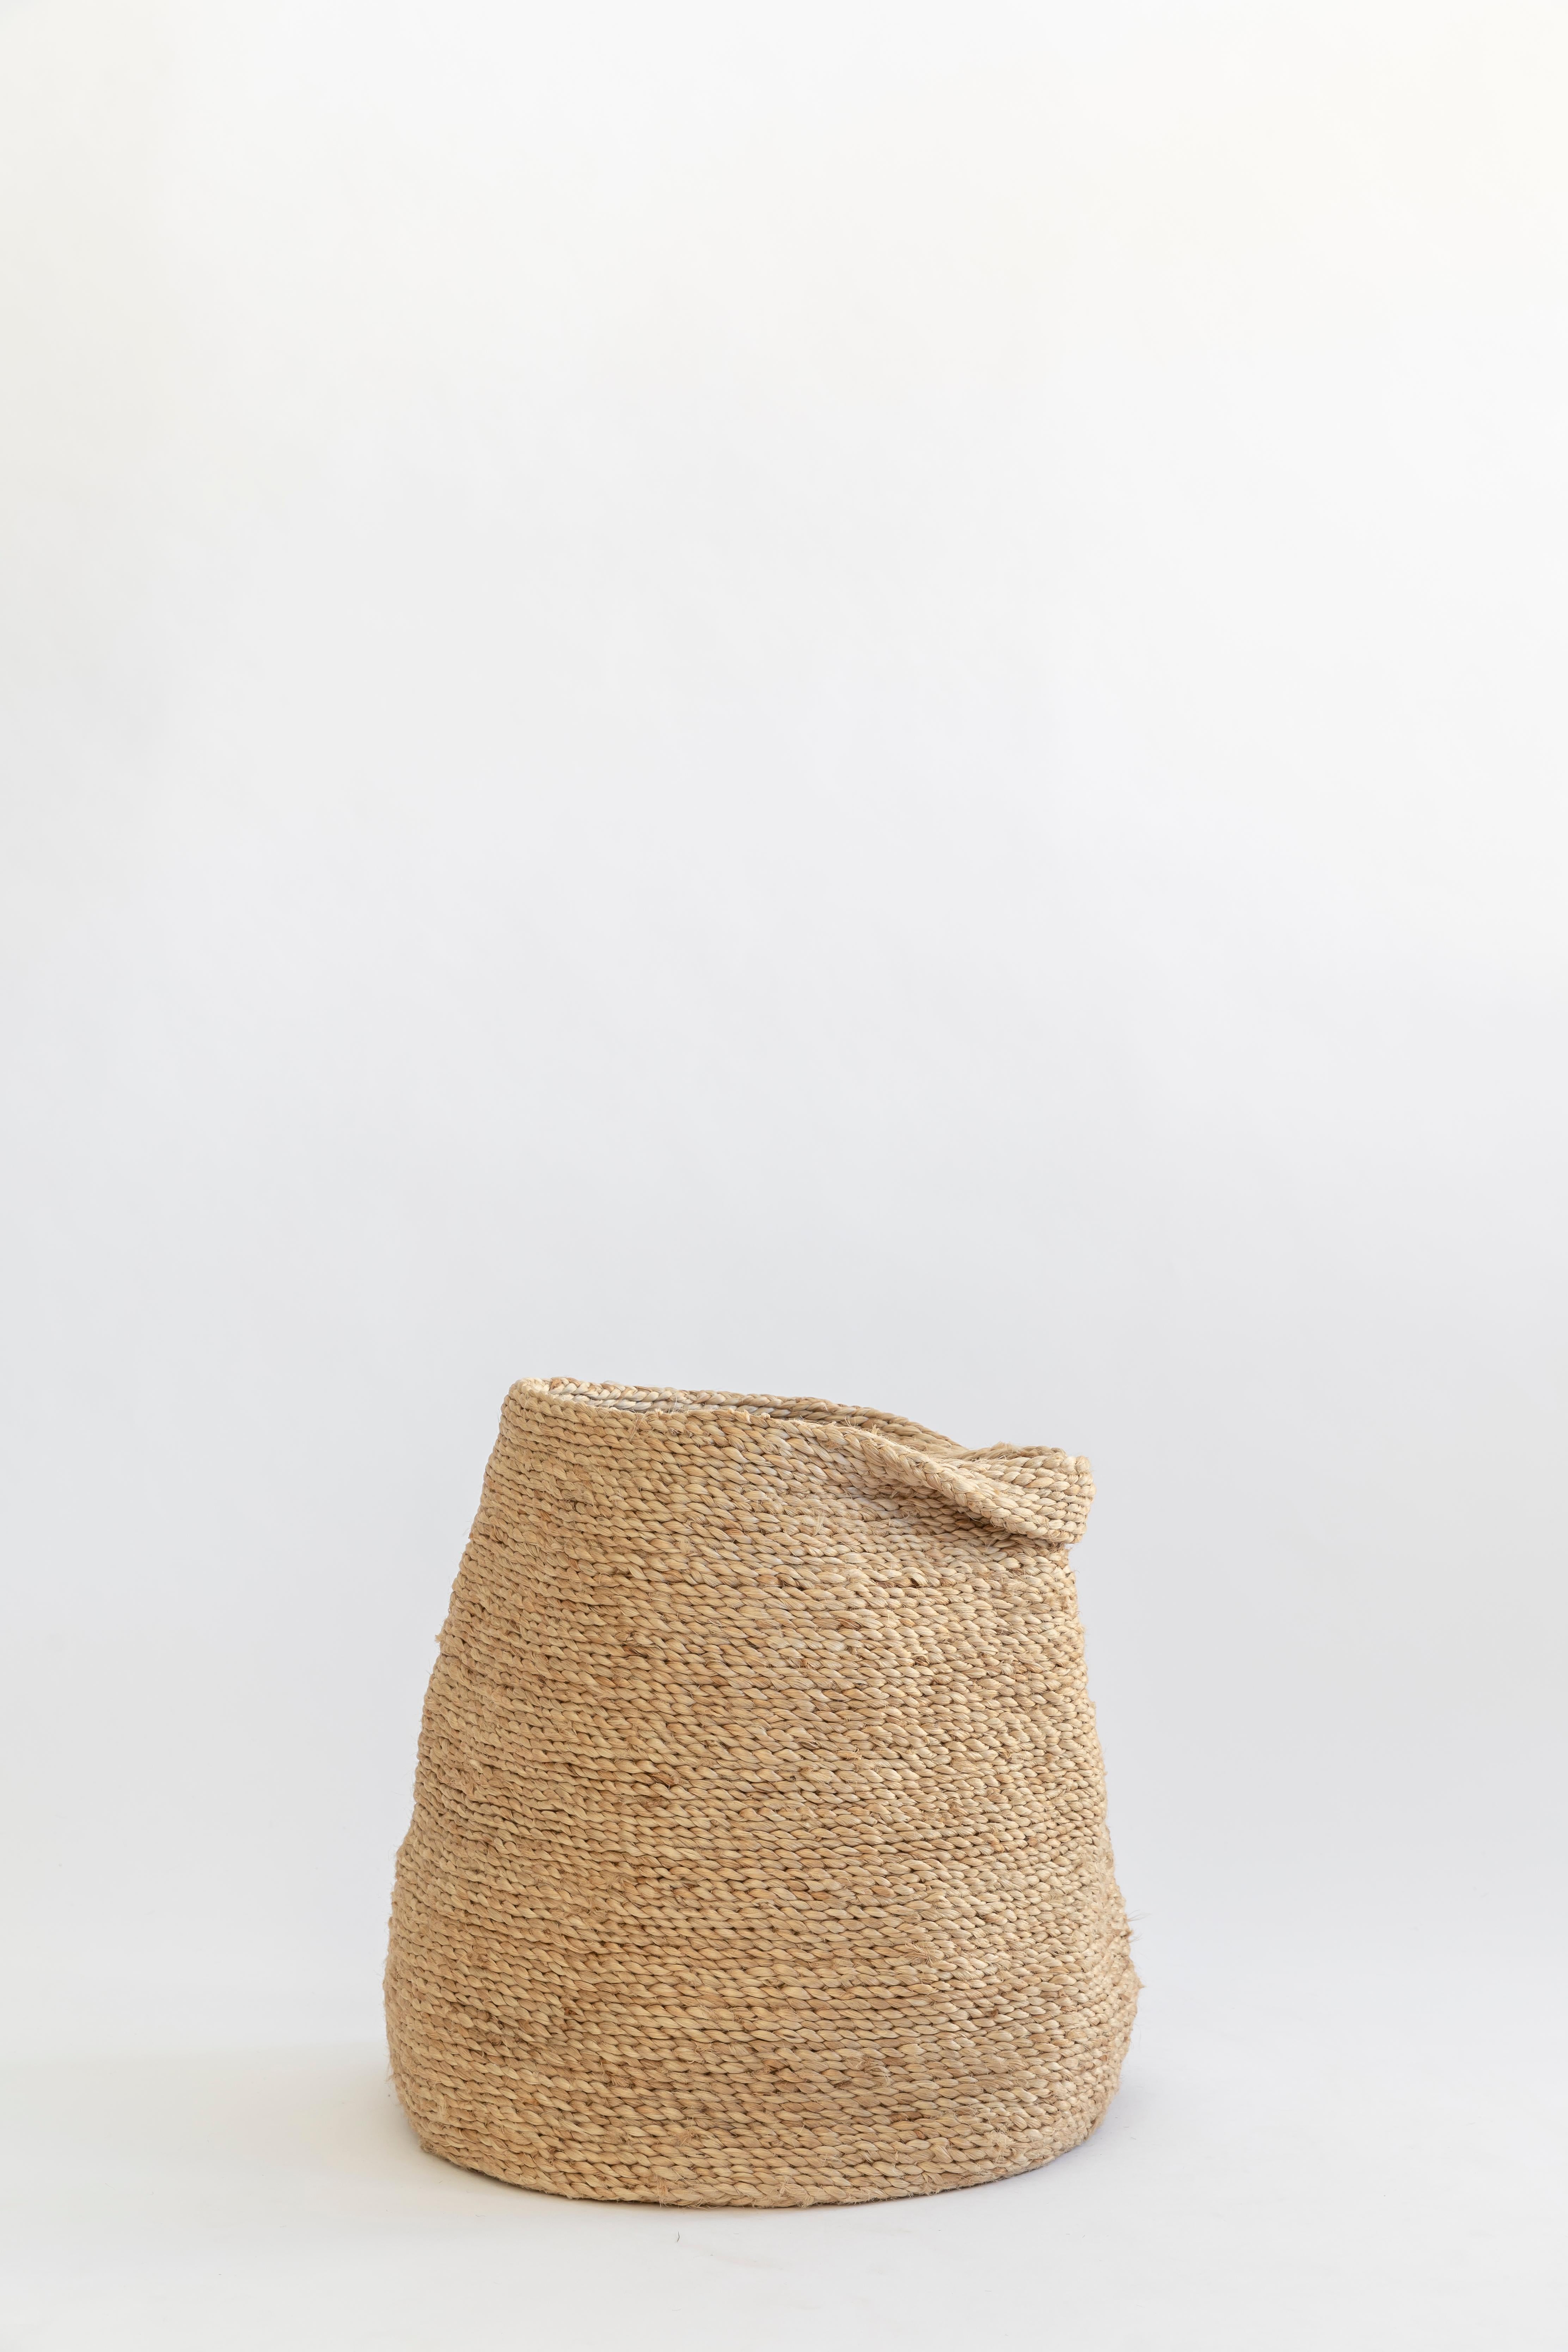 Woven Jute Pitcher Basket for Dried Branches For Sale